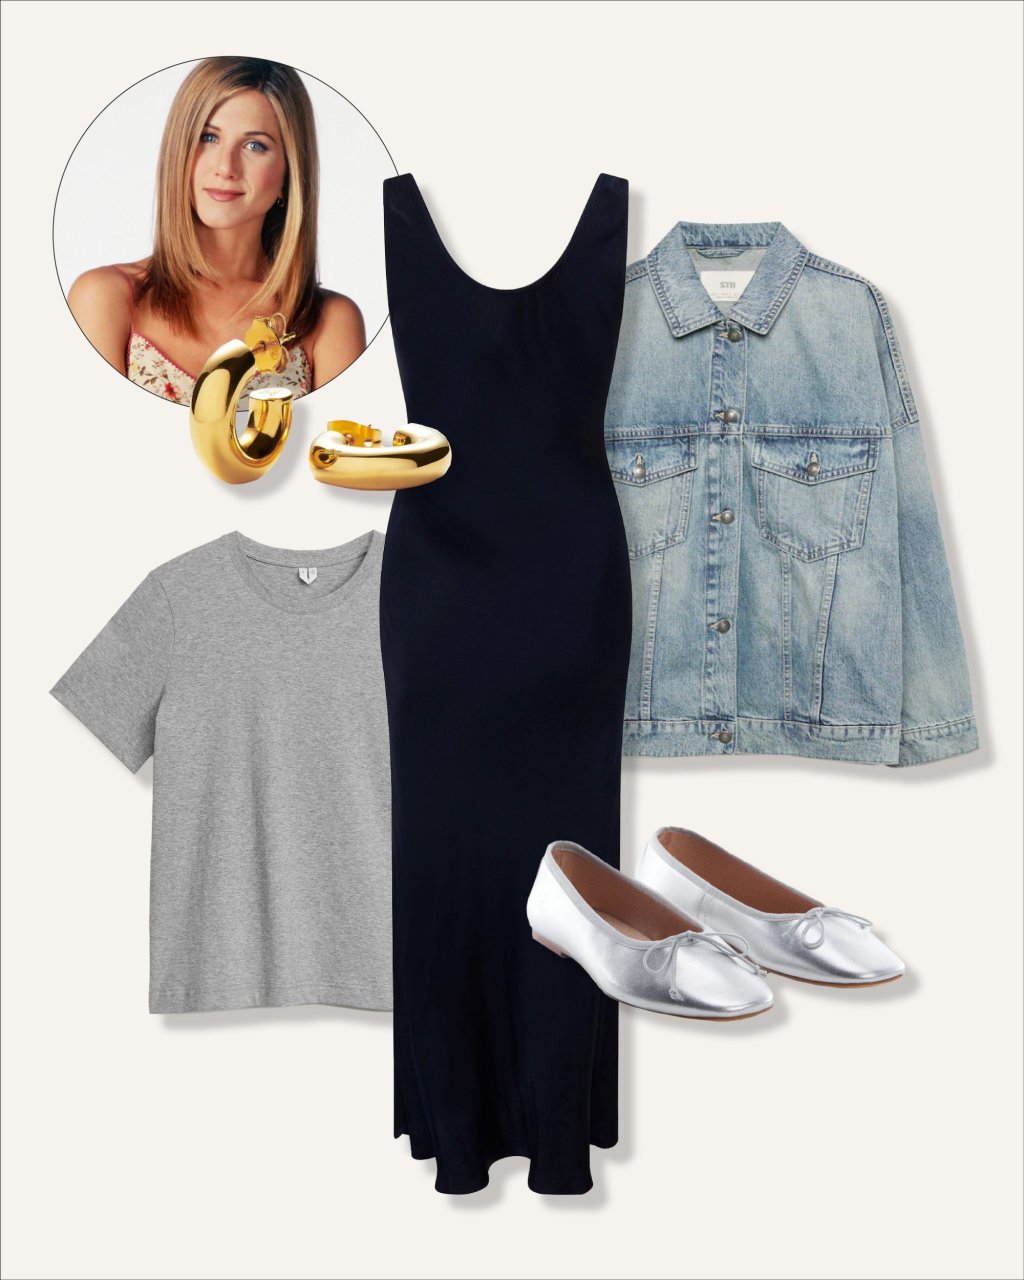 Rachel Green Workwear Outfits From Friends To Inspire You